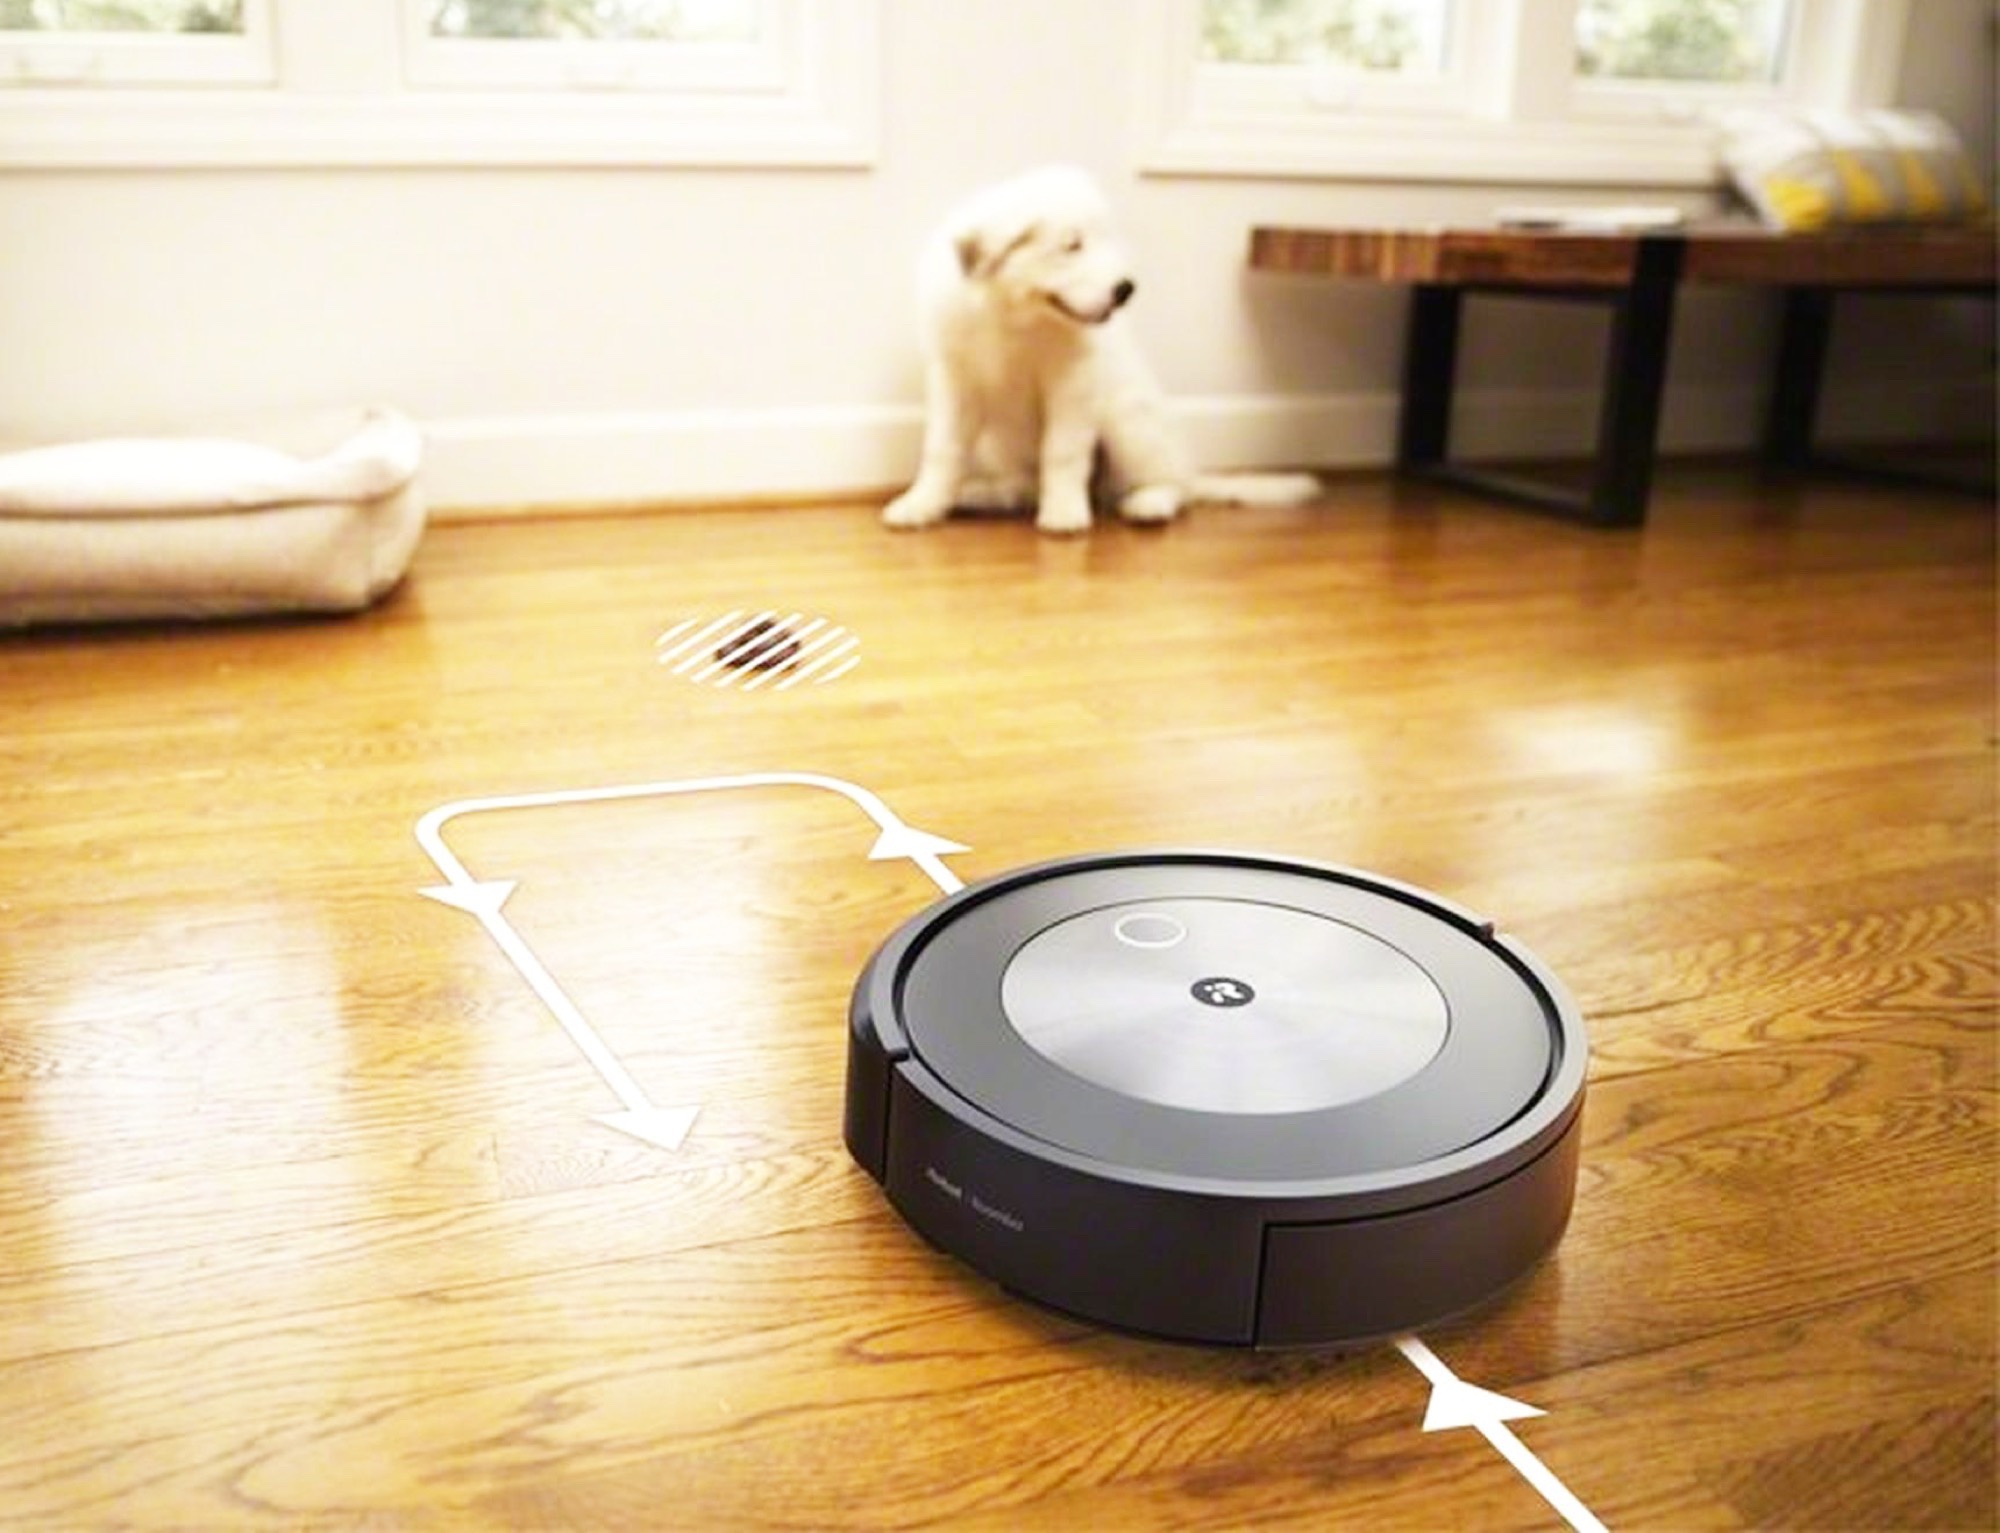 Narwal Freo Robot Vacuum Review: An Advanced Cleaning Assistant